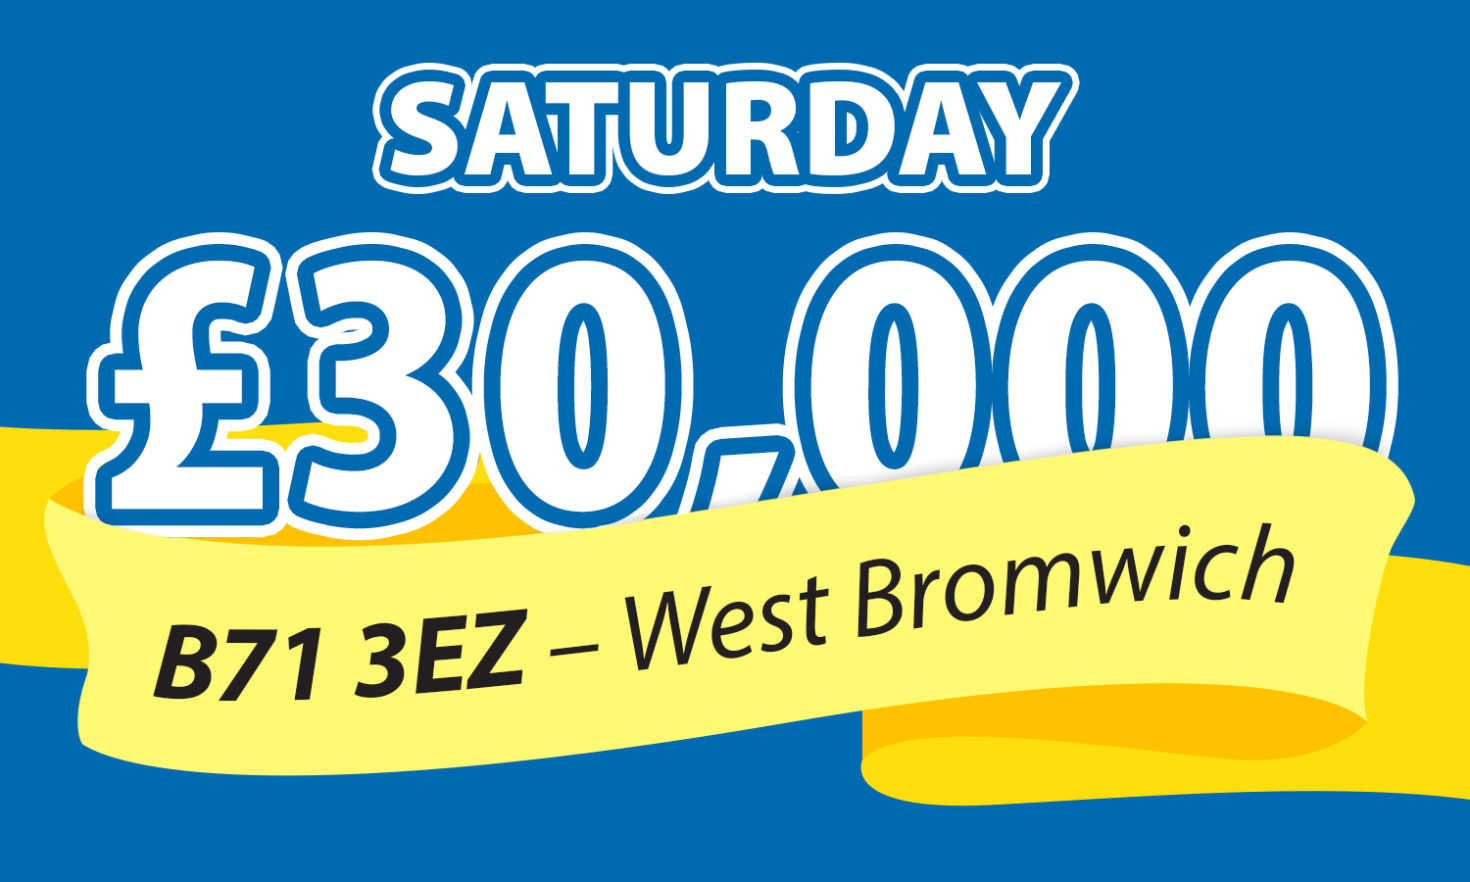 One winner in West Bromwich scooped £30,000 today